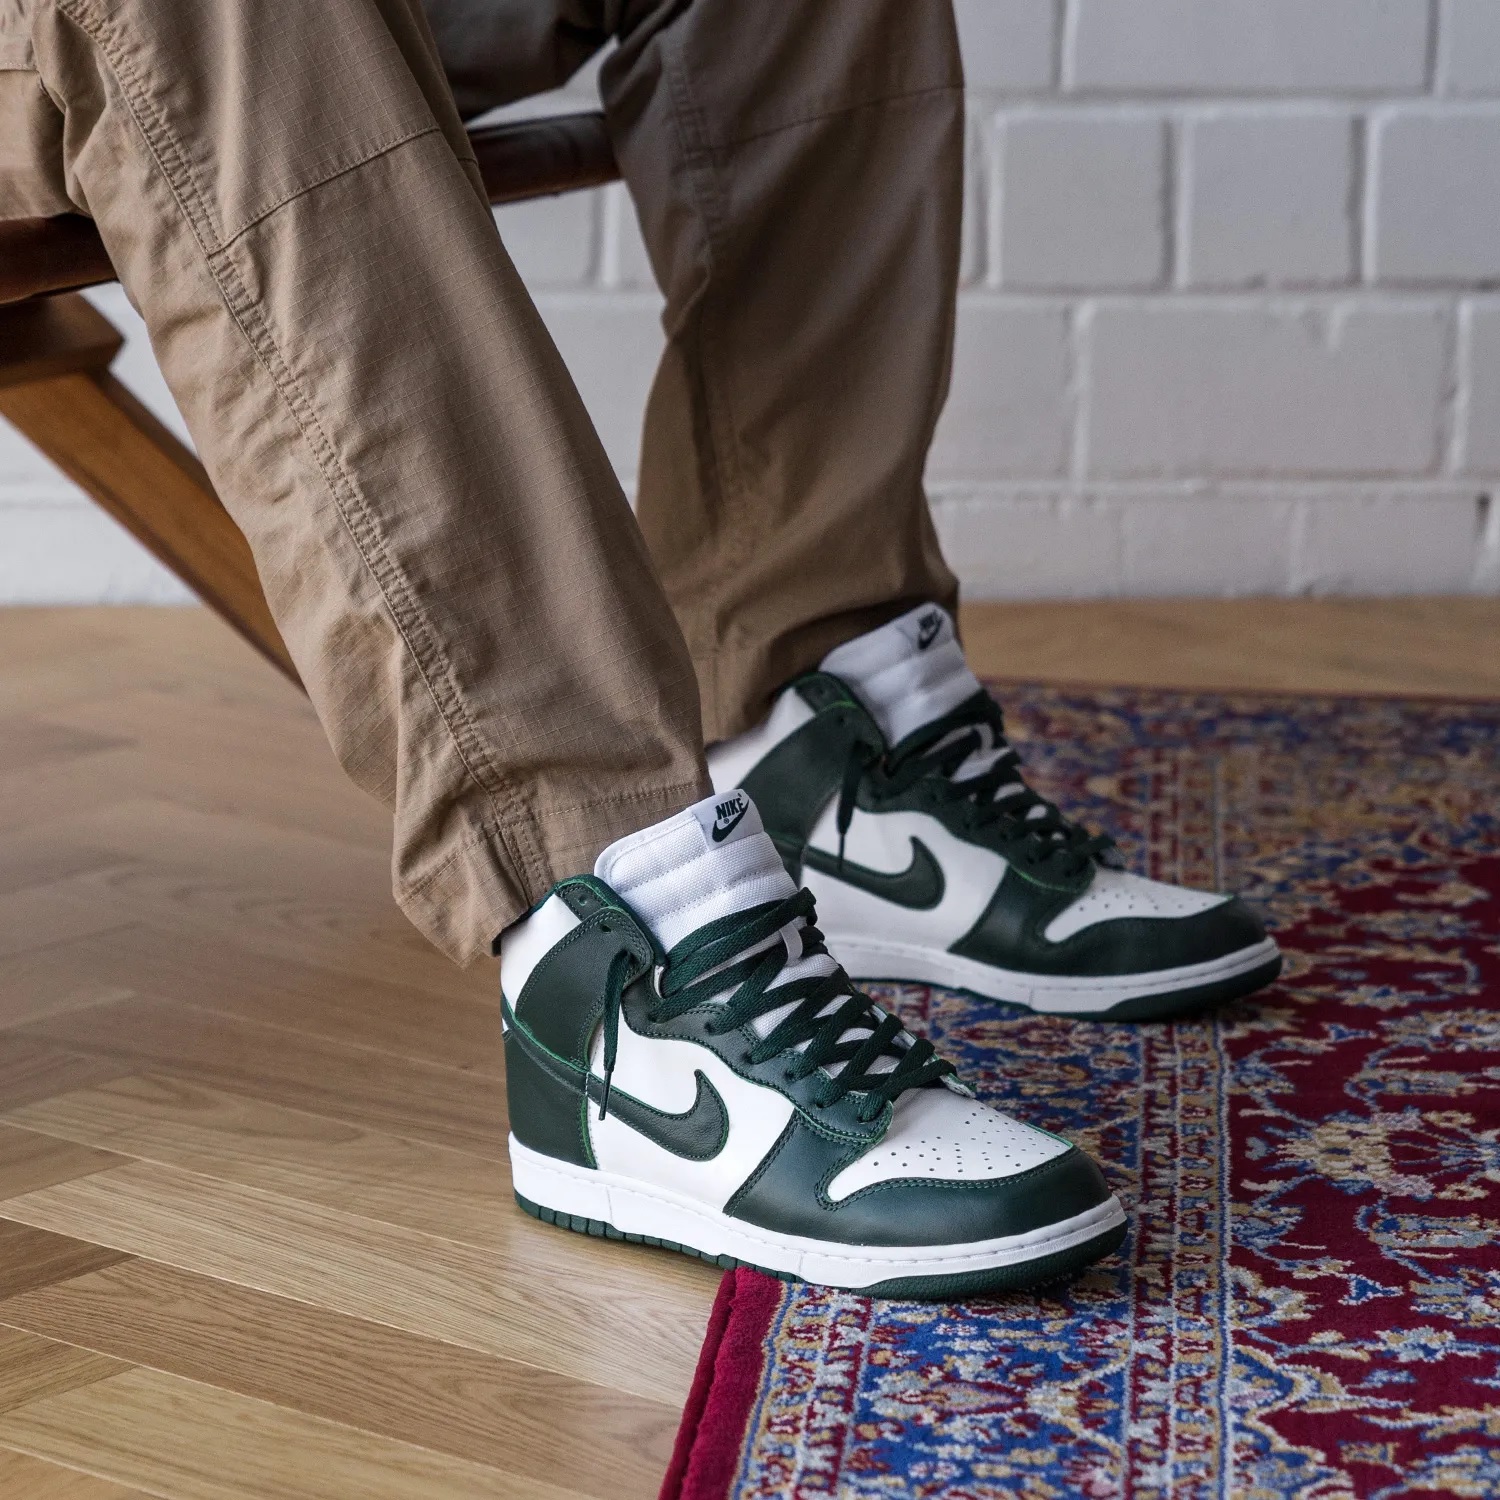 Zinloos Pence compressie MoreSneakers.com on Twitter: "AD: US RELEASE Nike Dunk High SP 'Pro Green'  – Spartan Green in 20min SNKRS:https://t.co/nTEan3tugr  Nicekicks:https://t.co/JWSTHTdKos https://t.co/5uj8kqmDta" / Twitter